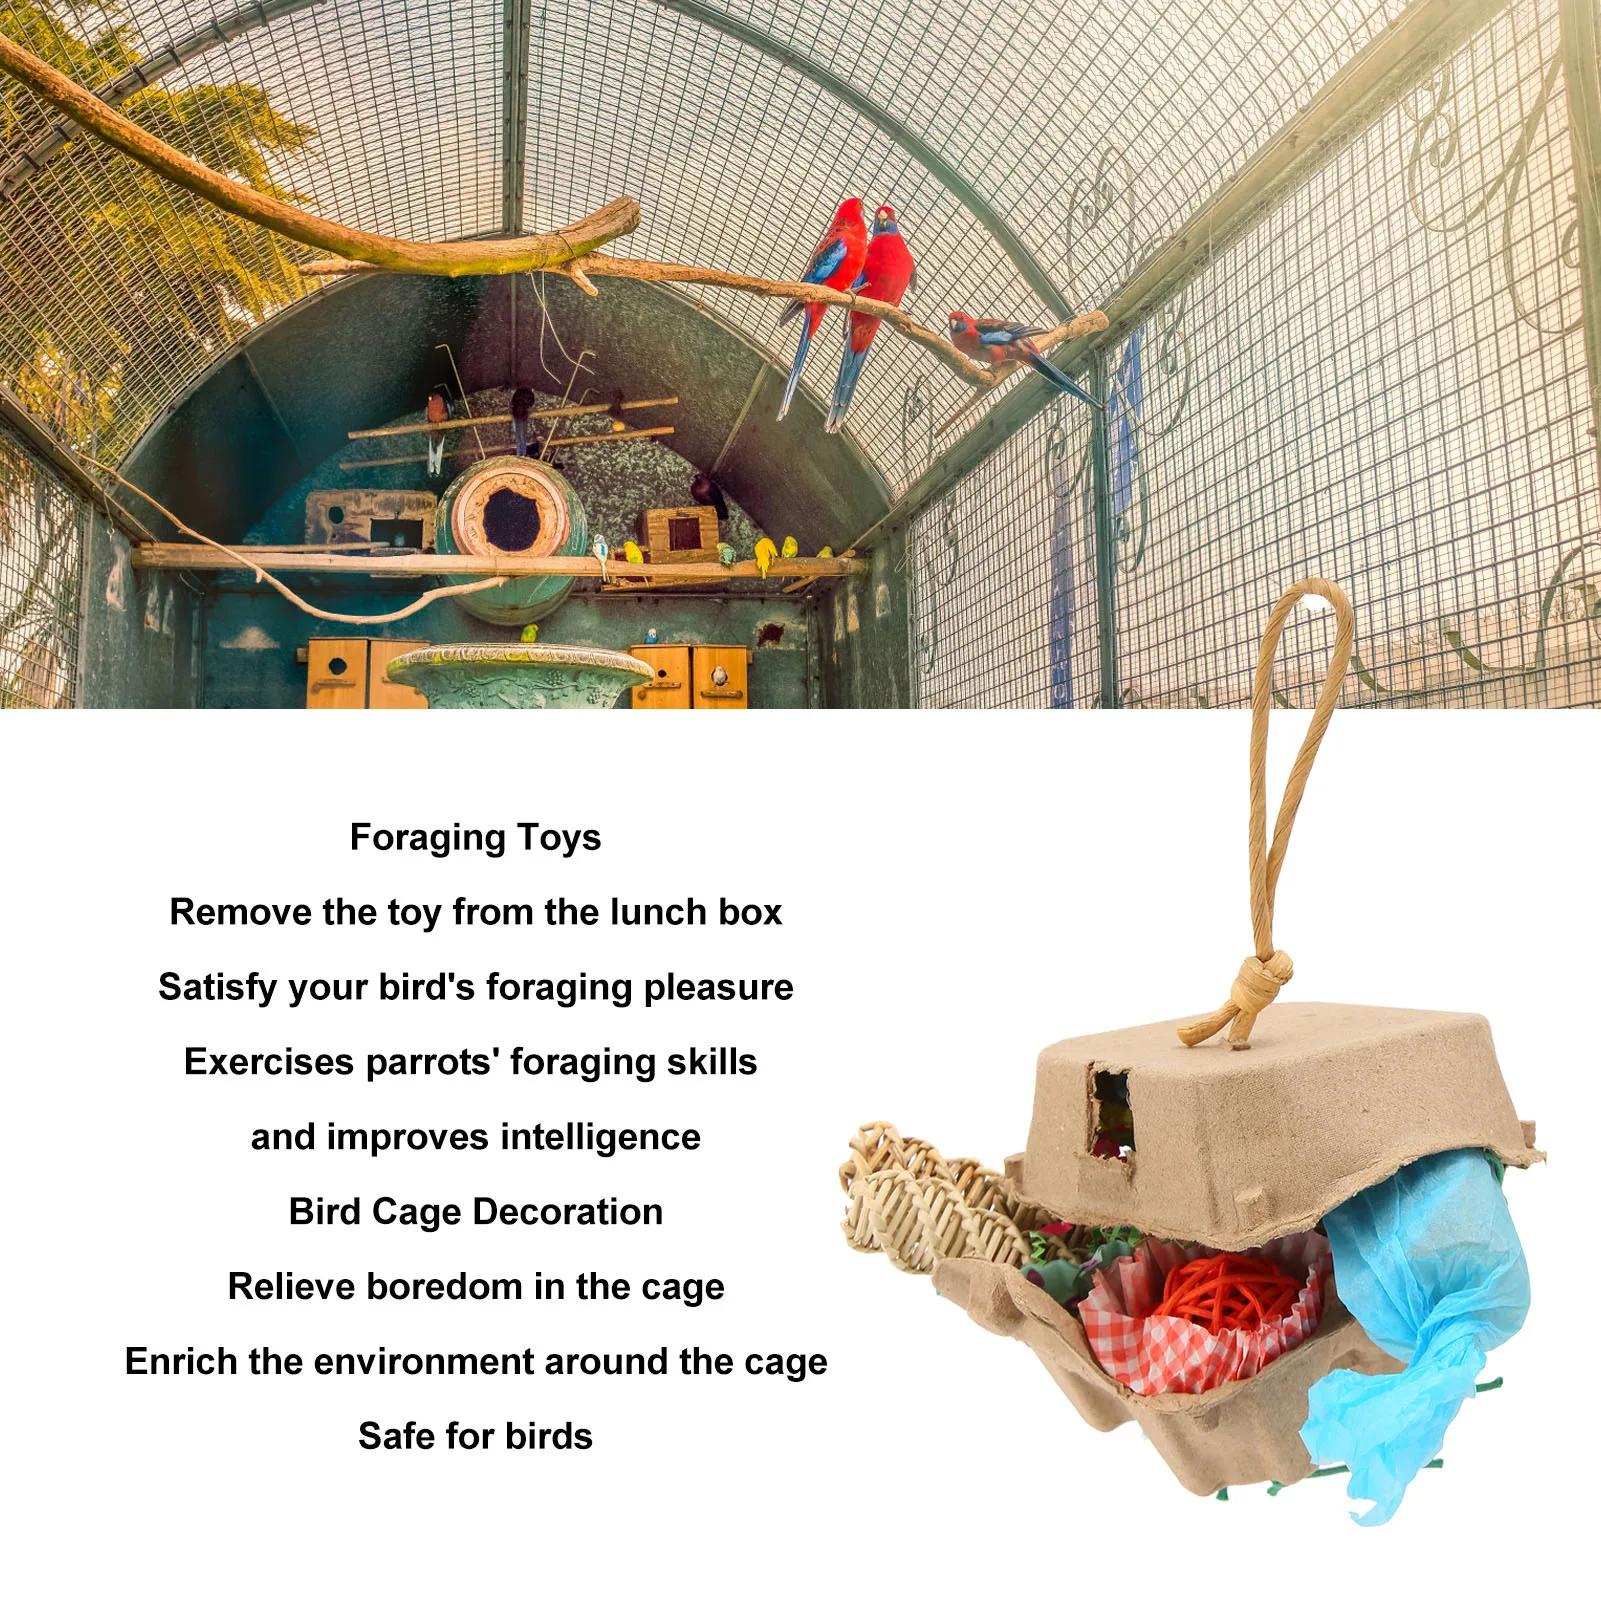 Bird Foraging Box Toys Fun Colorful Shredding Paper Sola Wood Rattan Ball Grass Rope Parrot Foraging Toys